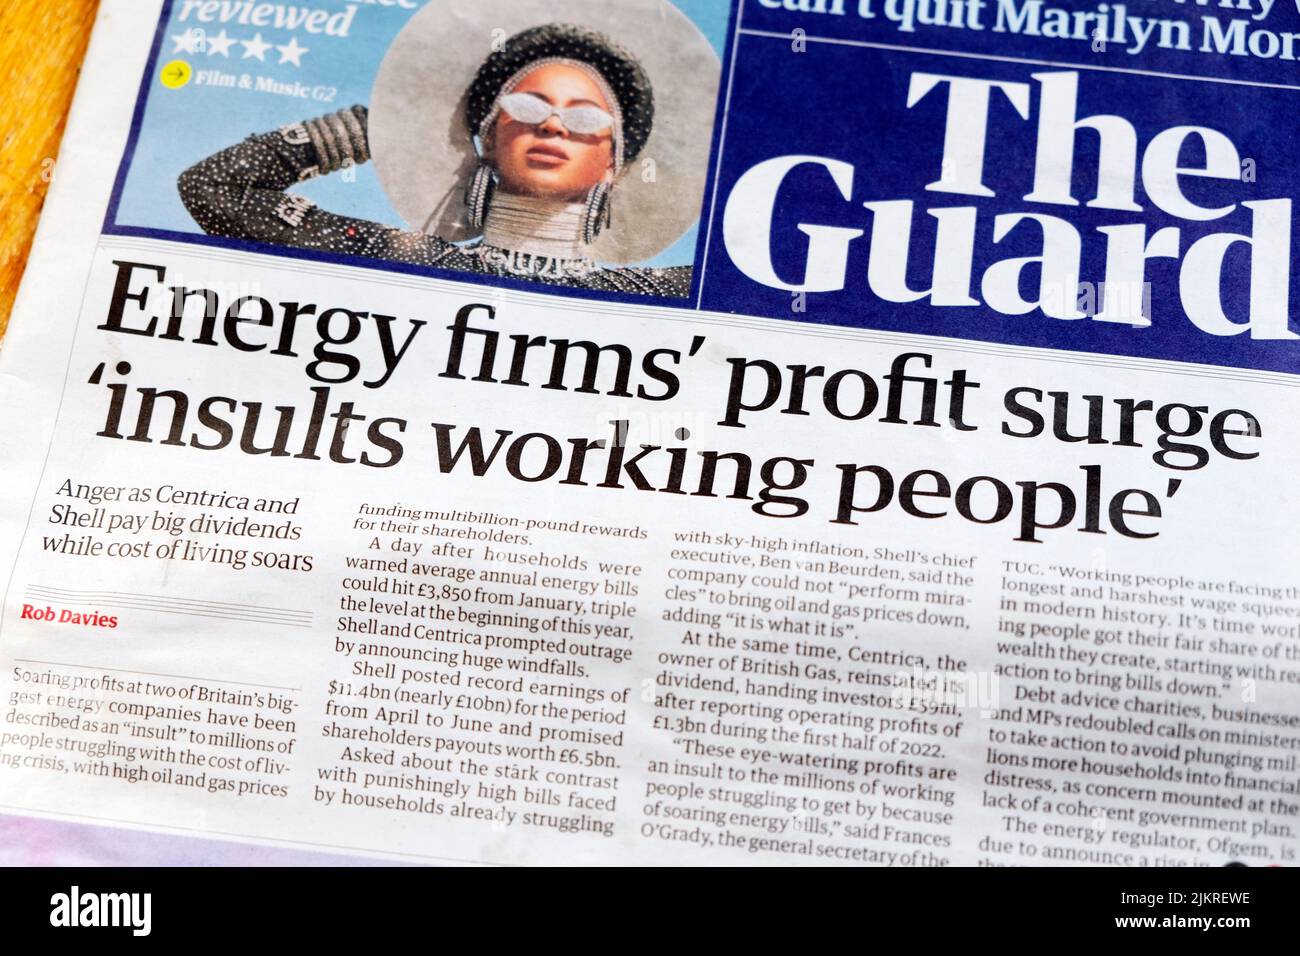 Energy firms' profit surge 'insults working people' The Guardian newspaper headline front page on 29 July 2022 in London UK Great Britain Stock Photo